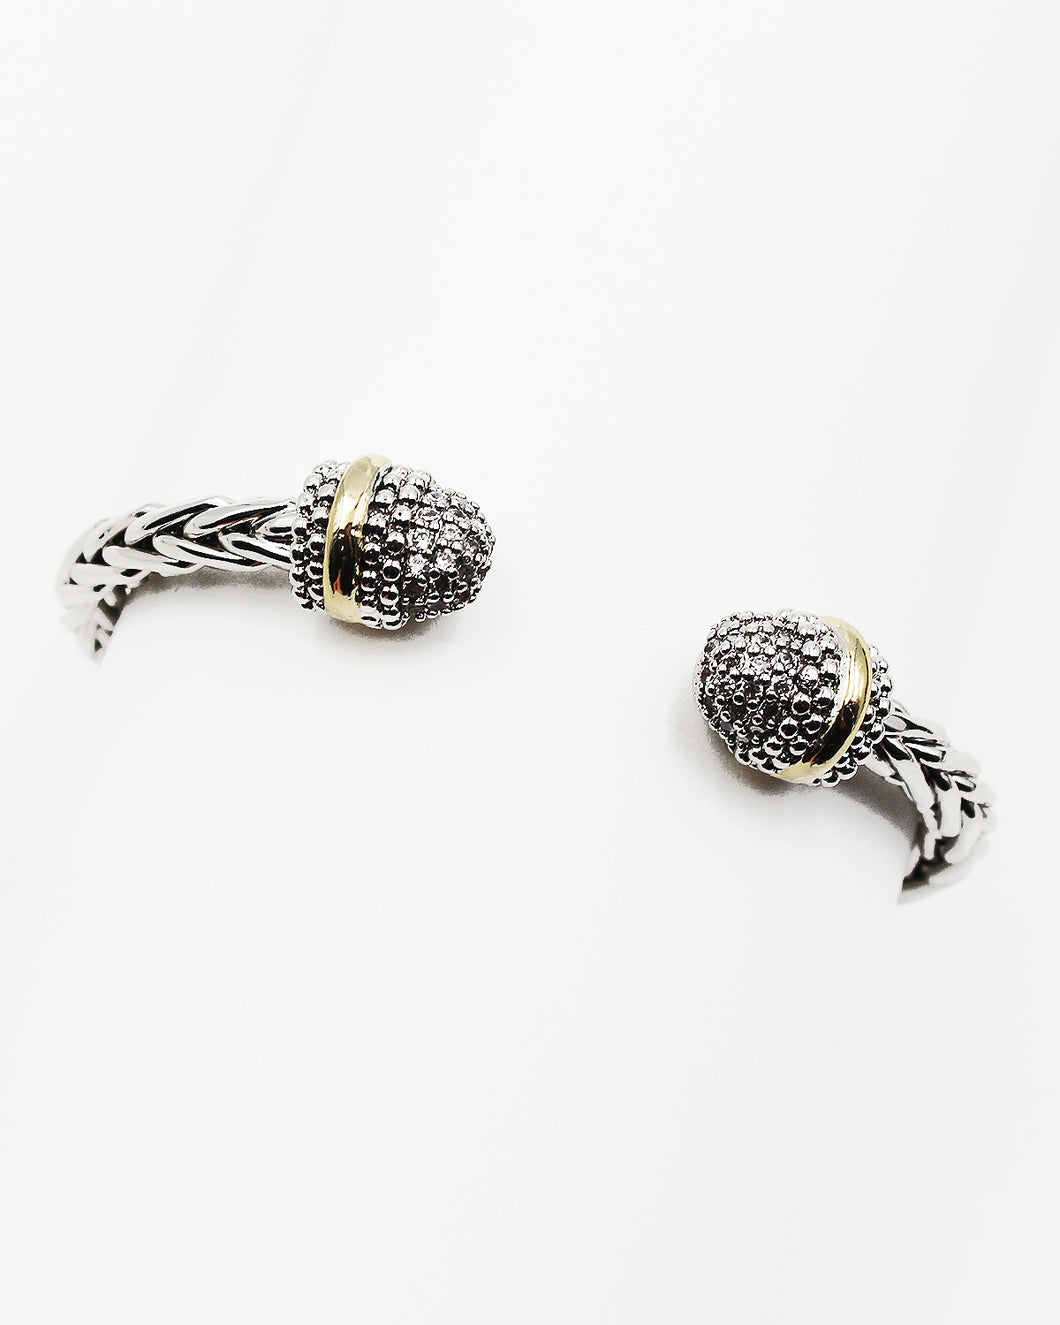 Braided Cuff Bracelet with Pave Stone Tip